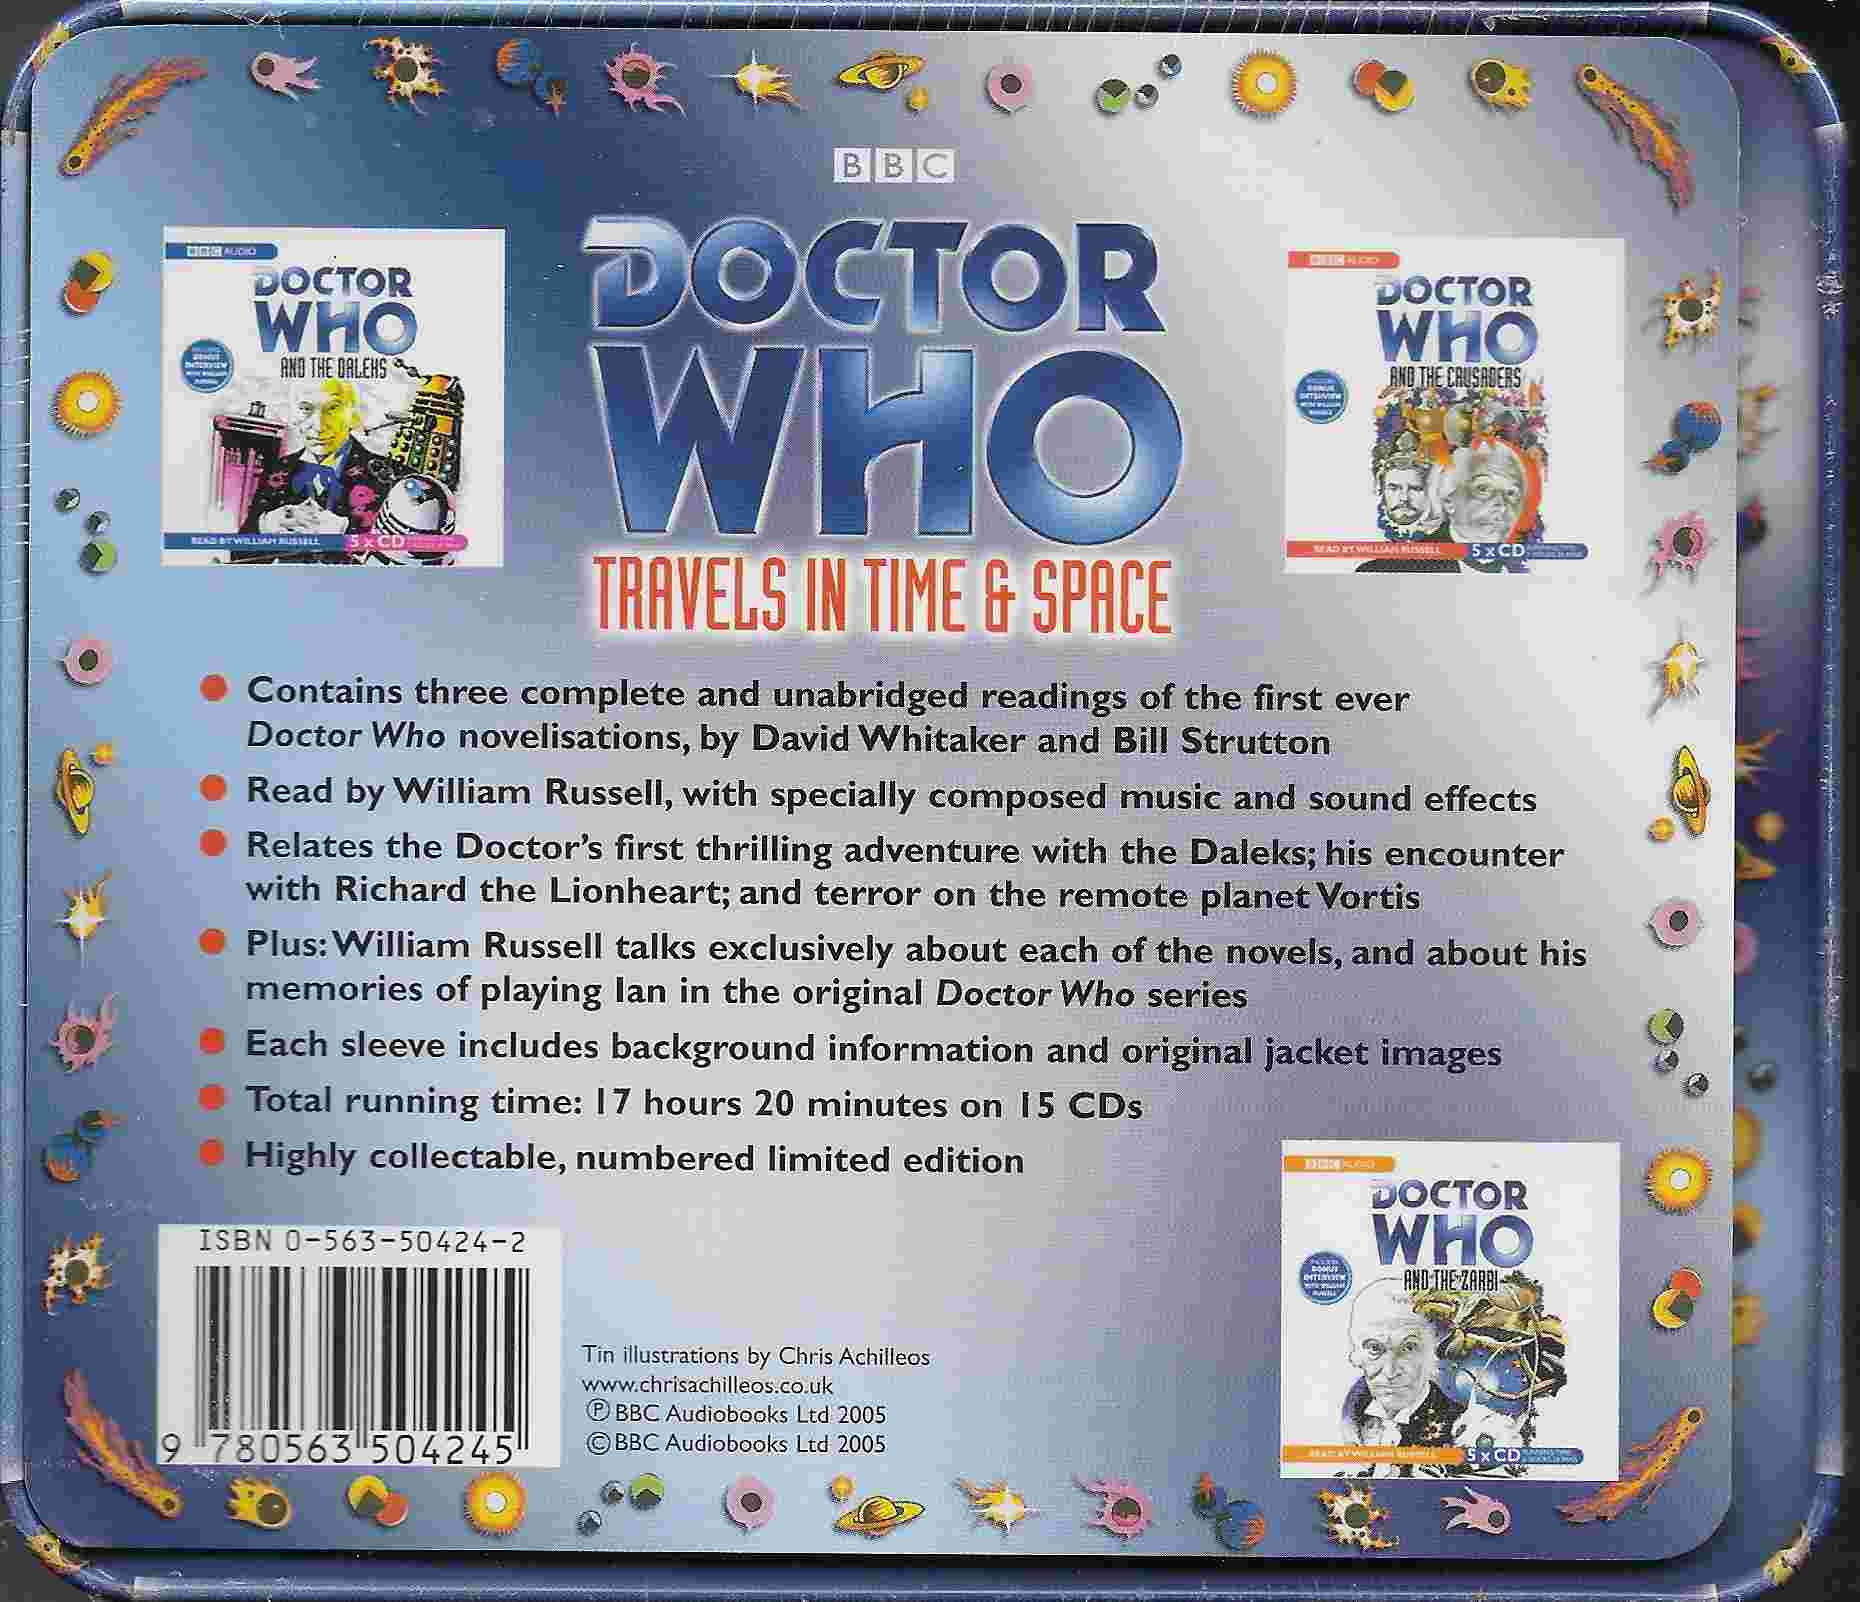 Picture of ISBN 0-563-50424-2 Doctor Who - Travels in time & space by artist David Whitaker / BillStrutton from the BBC records and Tapes library